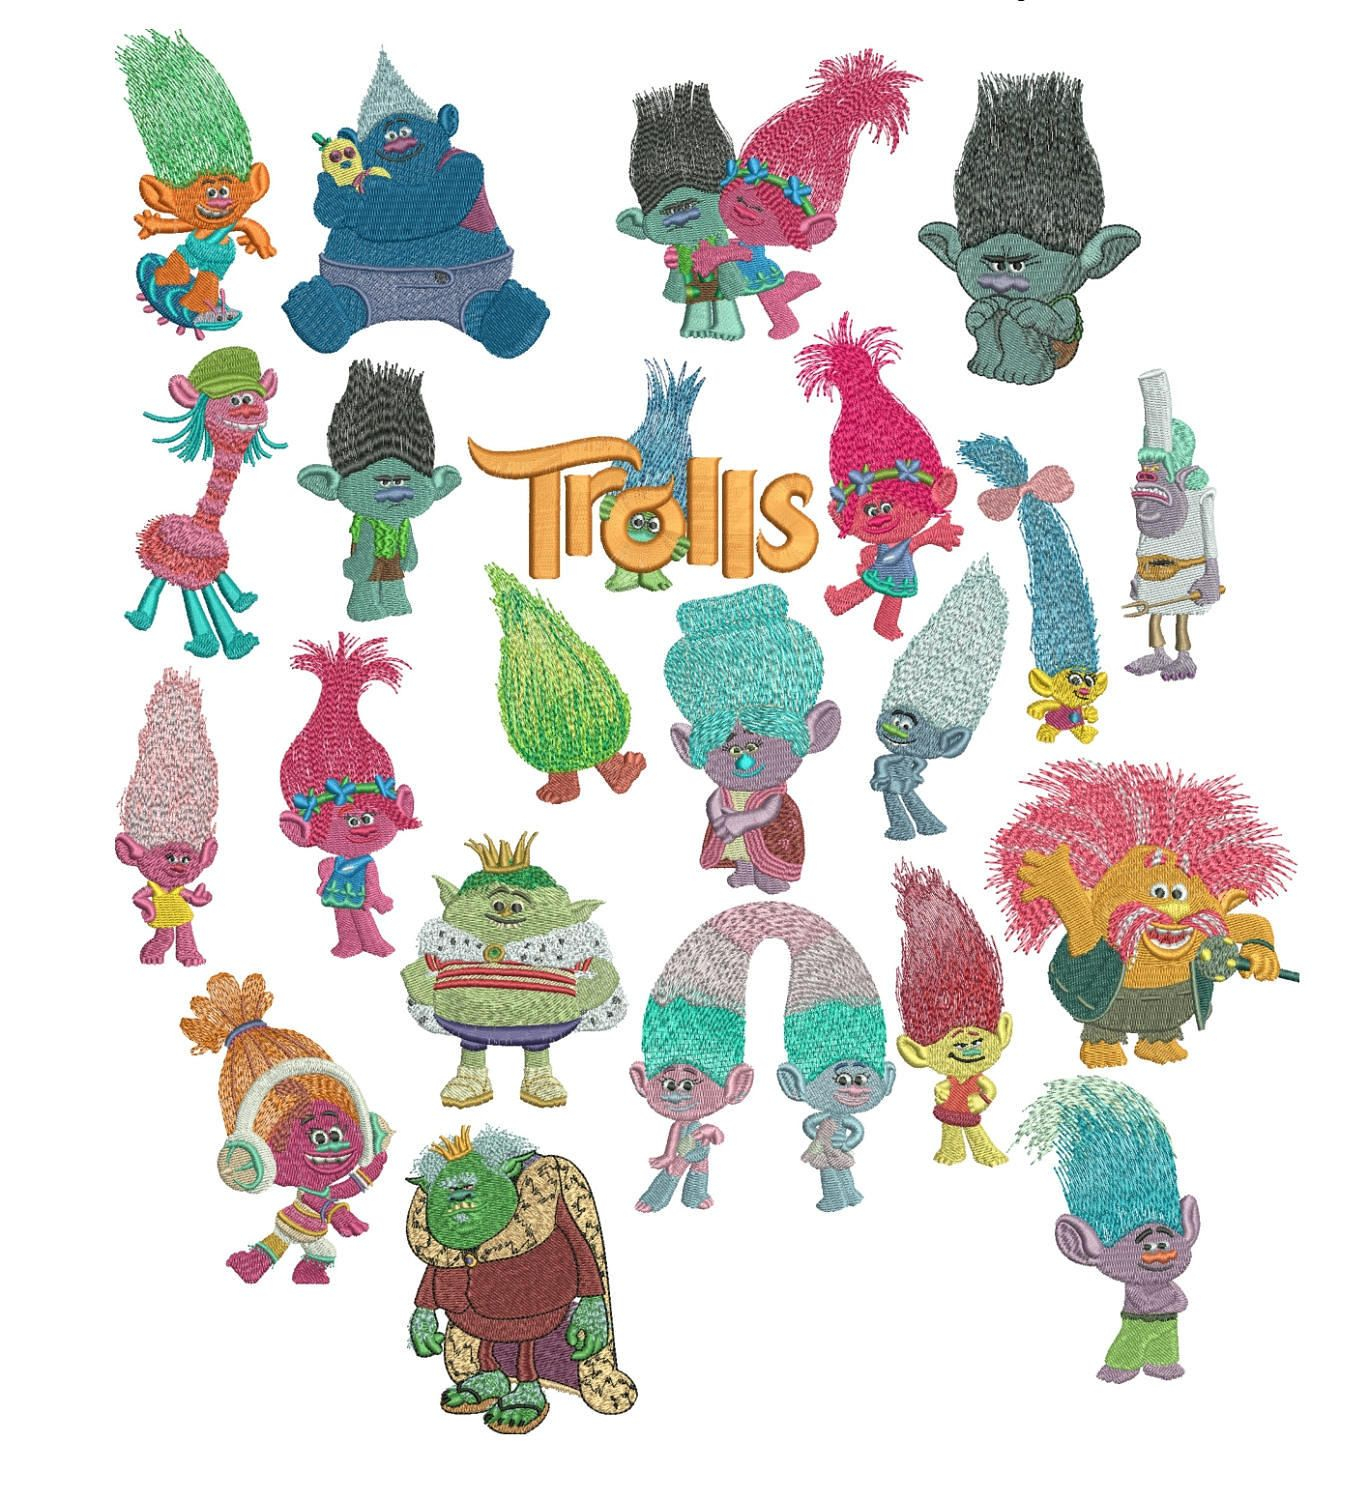 Free Machine Embroidery Patterns To Download Trolls Machine Embroidery Designs 22 Characters